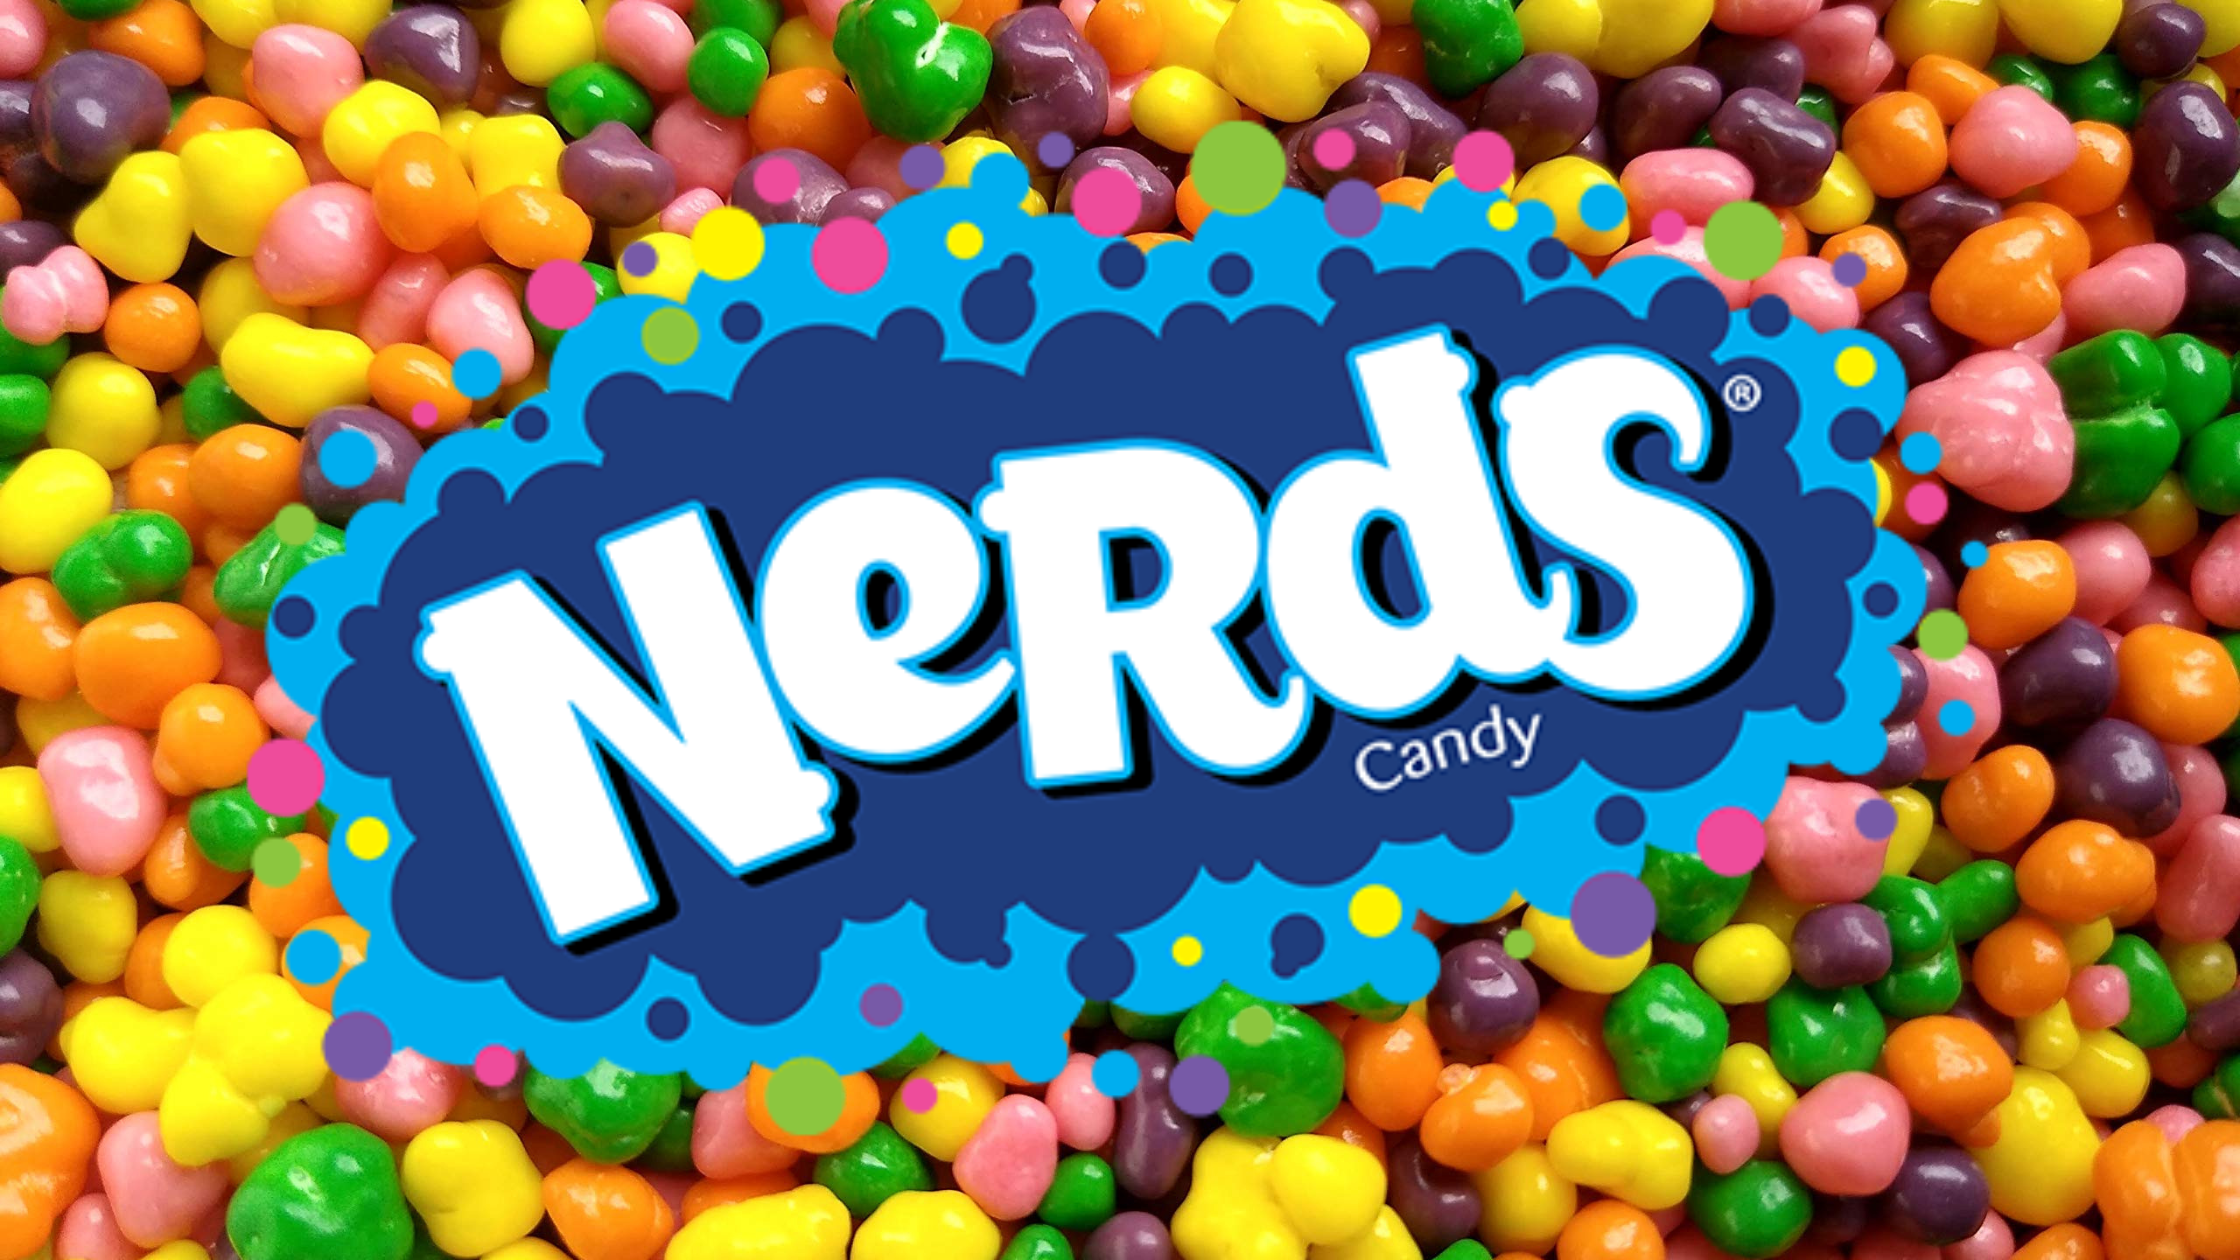 Try All The Exciting Nerds Candy Flavors Available Now